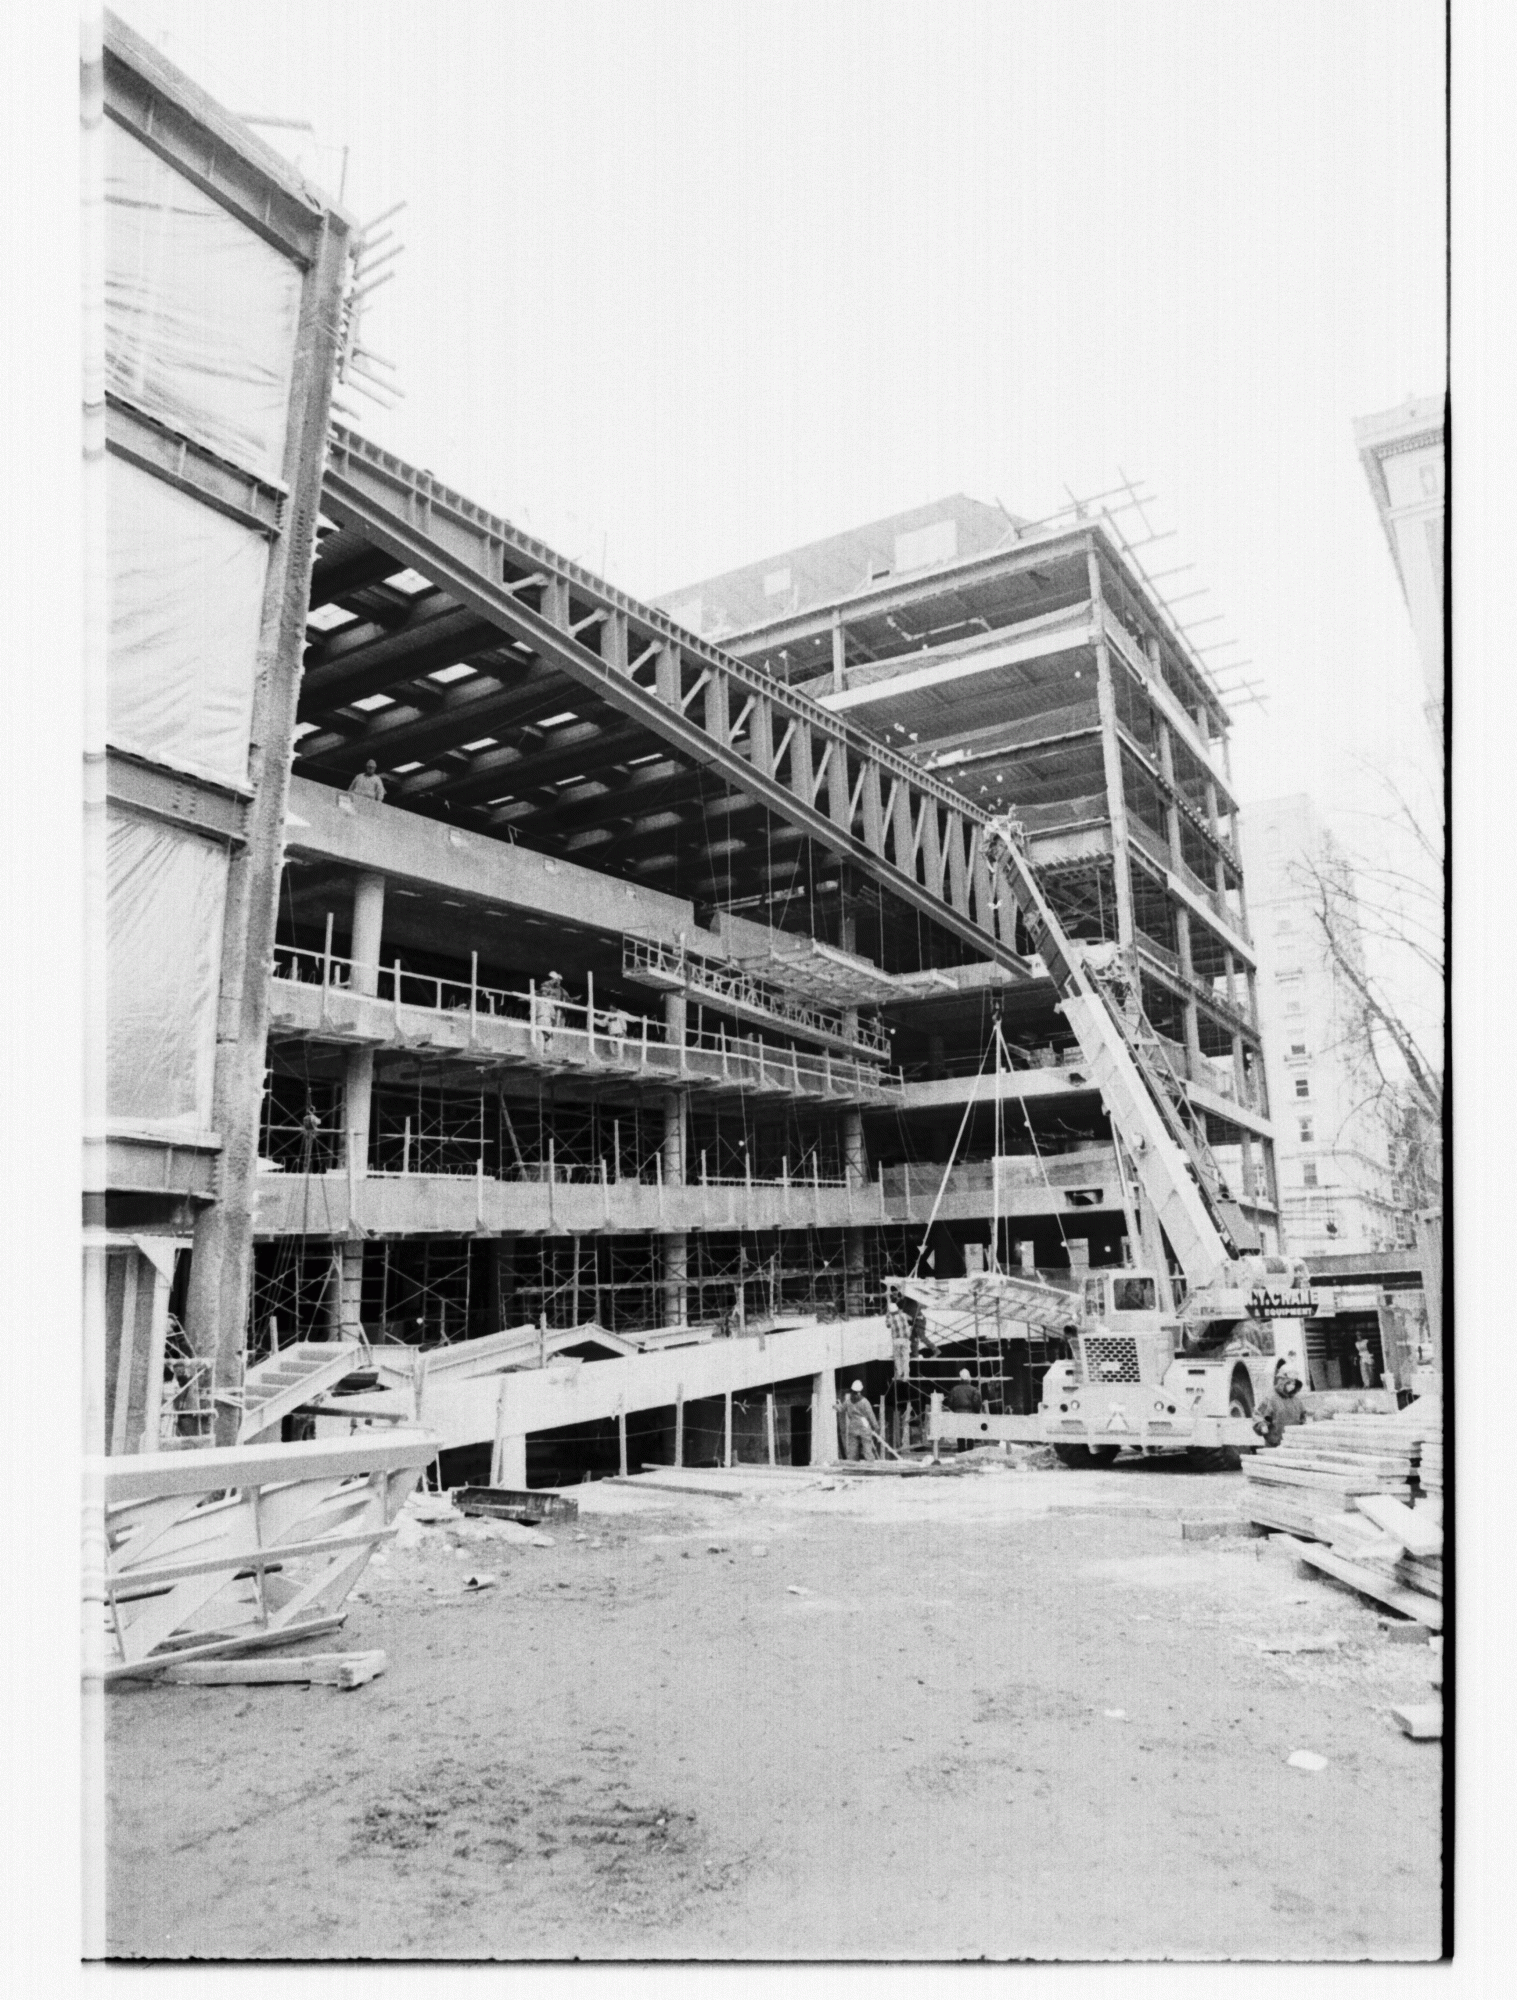 The building production was implemented by Bernard Tschumi Architects and Gruzen Samton Associated Architects, with contributions from Severud Associates, Ove Arup & Partners (New York), and Hugh Dutton (HAD) Paris. Photo courtesy of Columbia University Archives. 